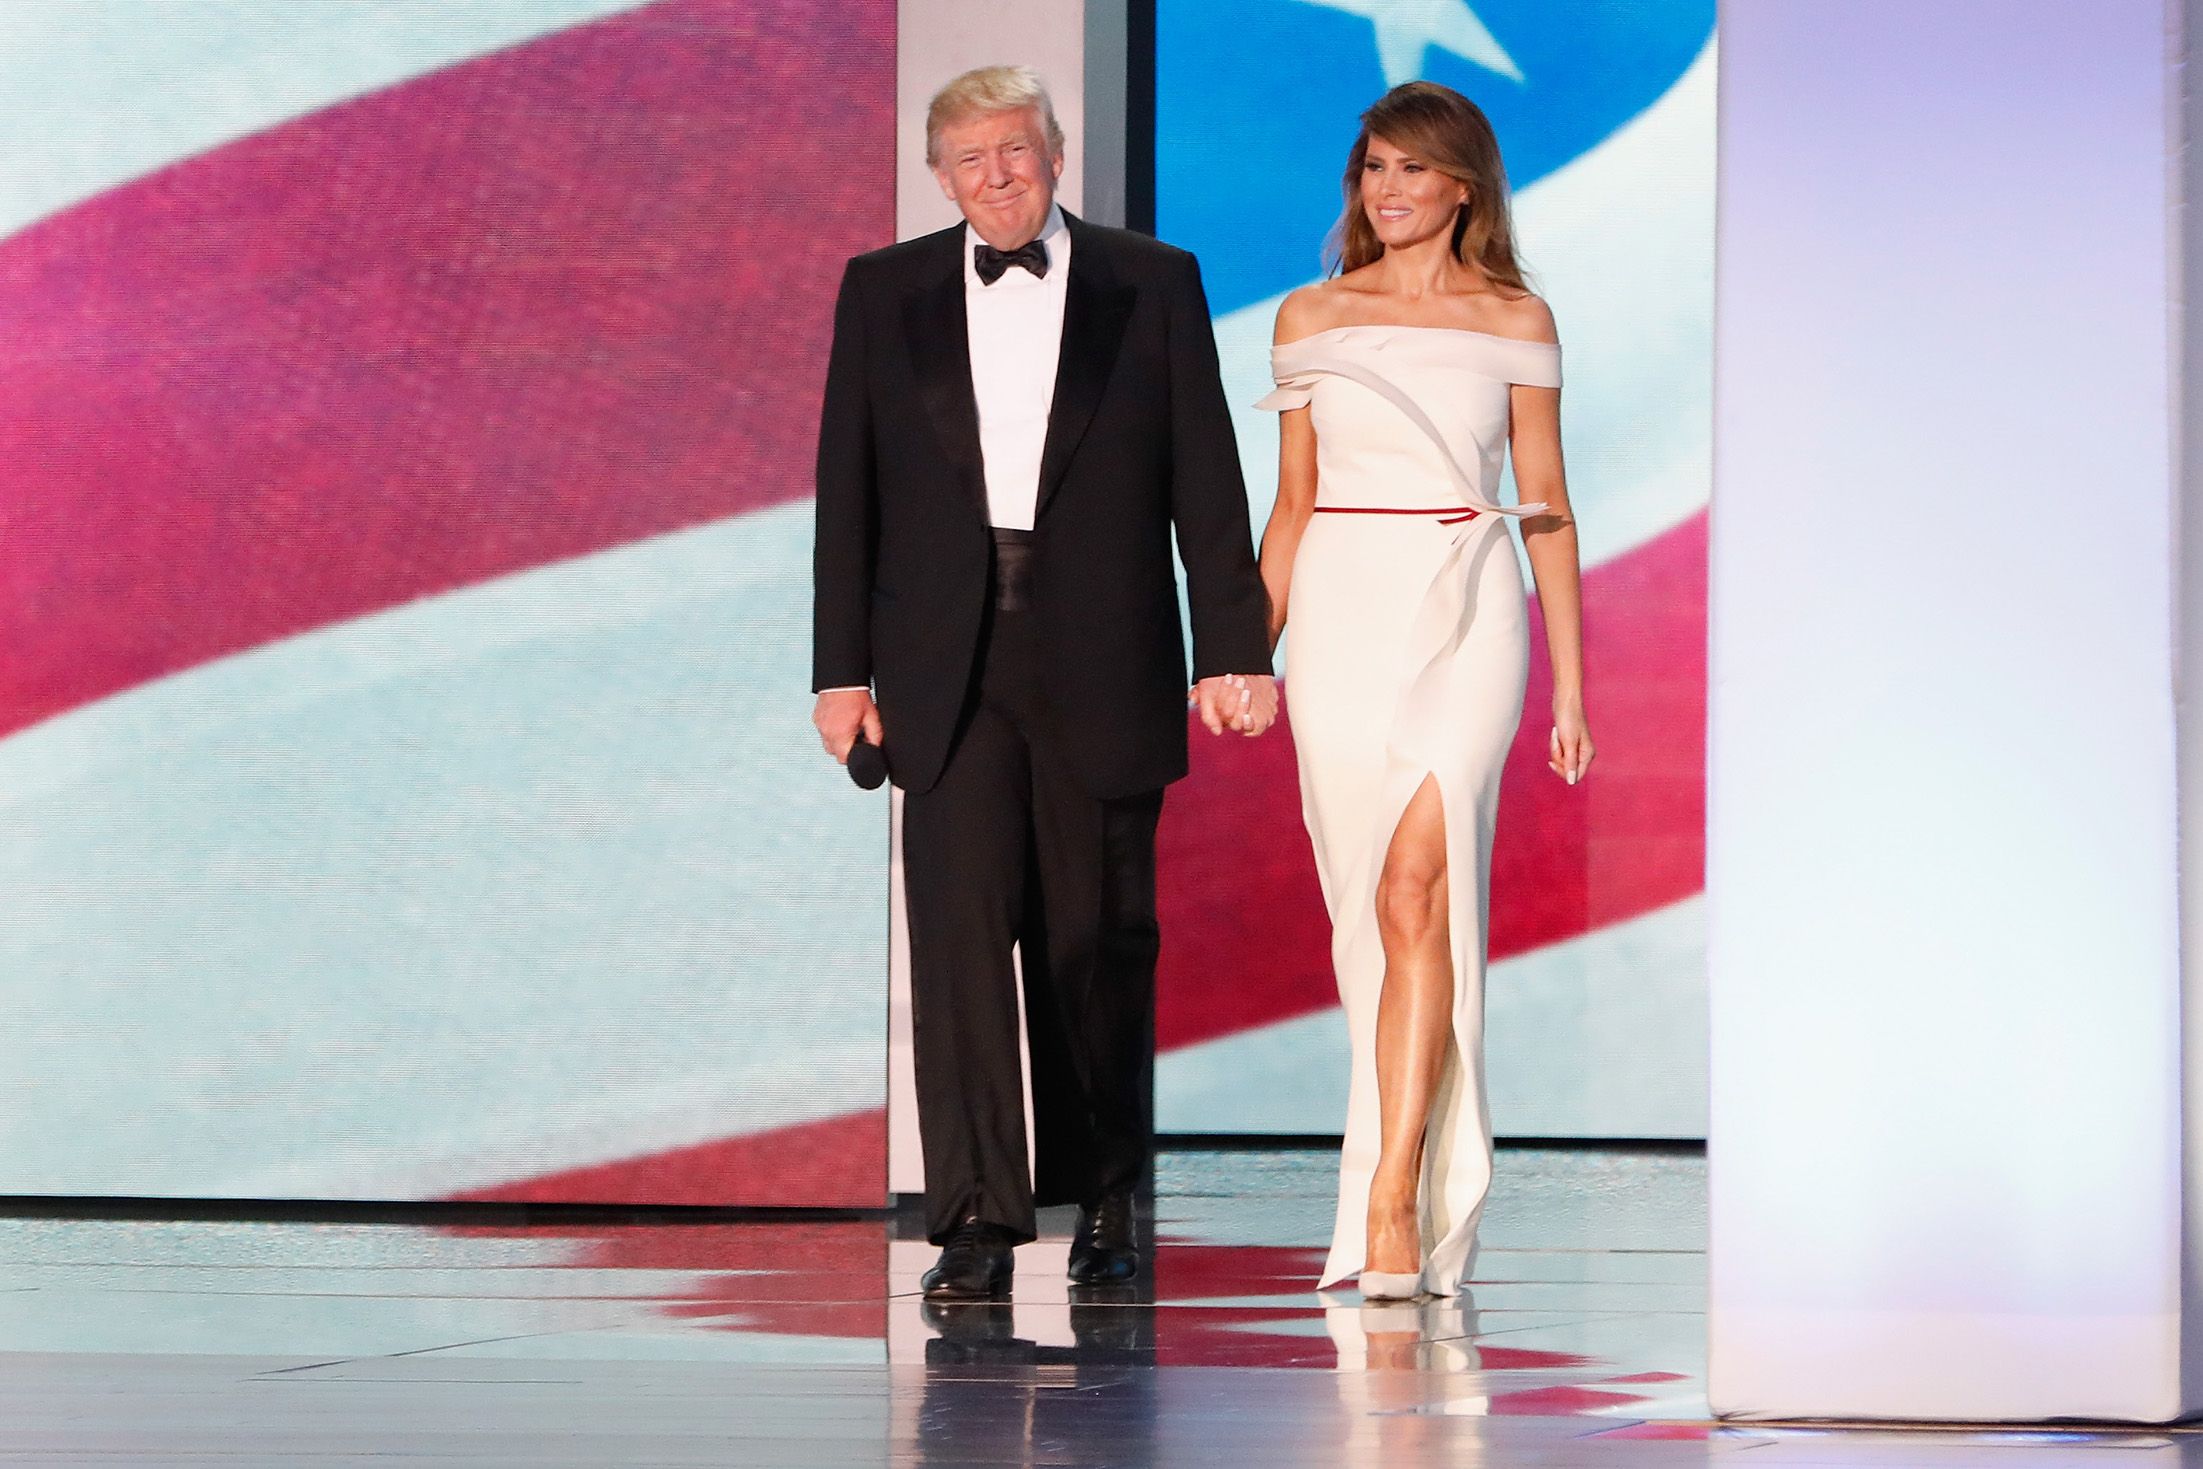 Melania Trump helped design her own inaugural gown